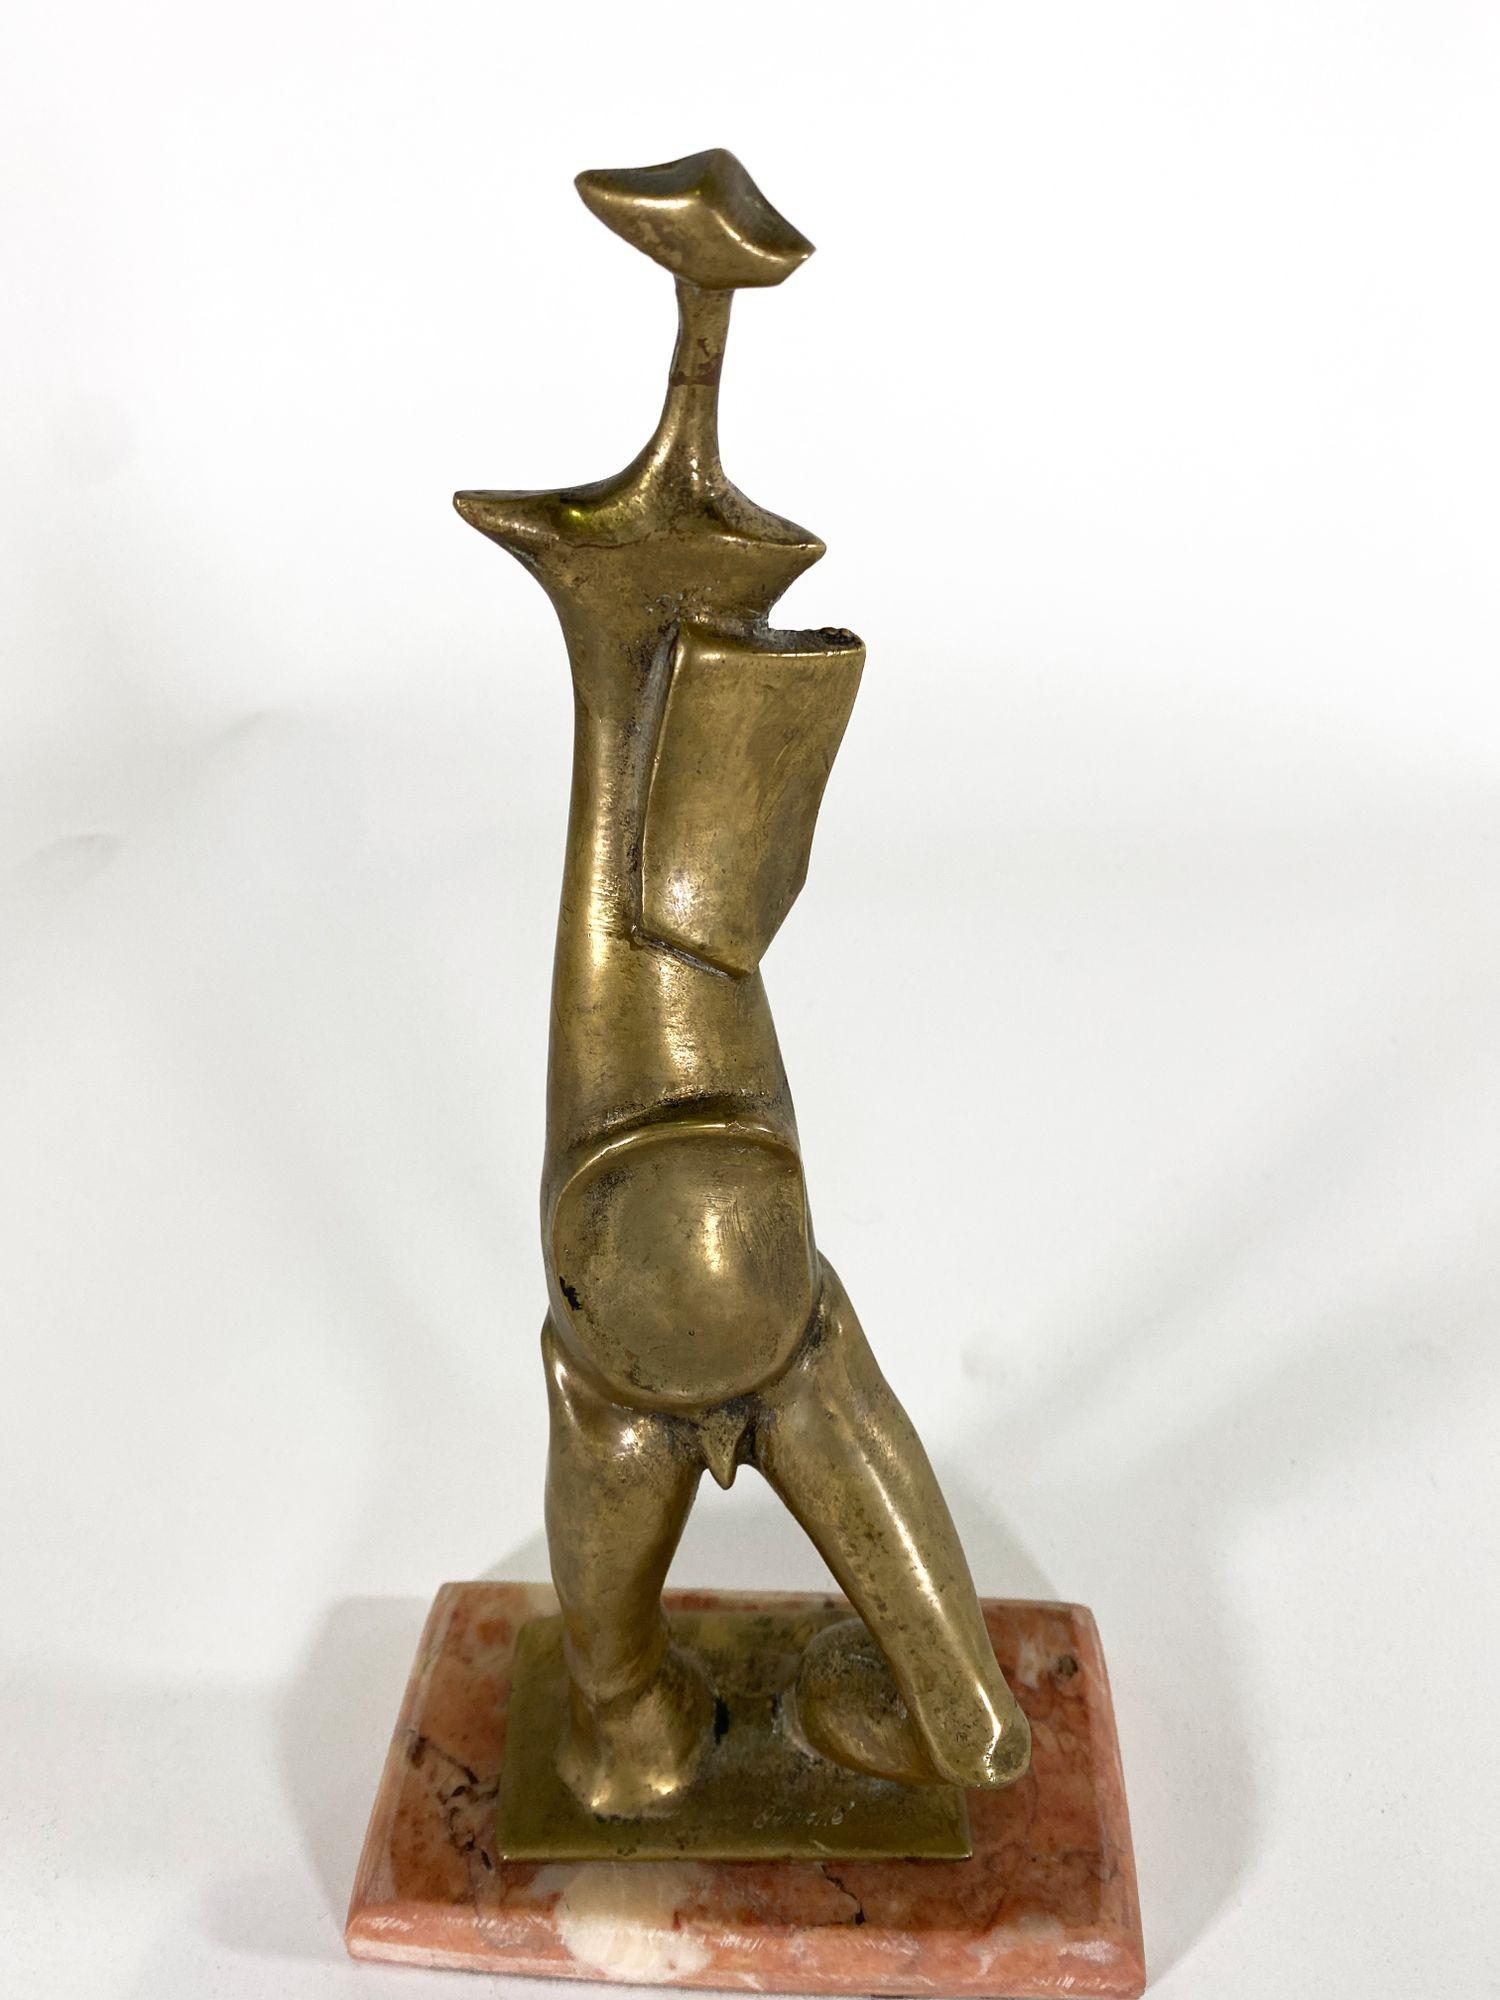 Italian Modern Bronze Abstract Sculpture on Marble Base, 1950s For Sale 3